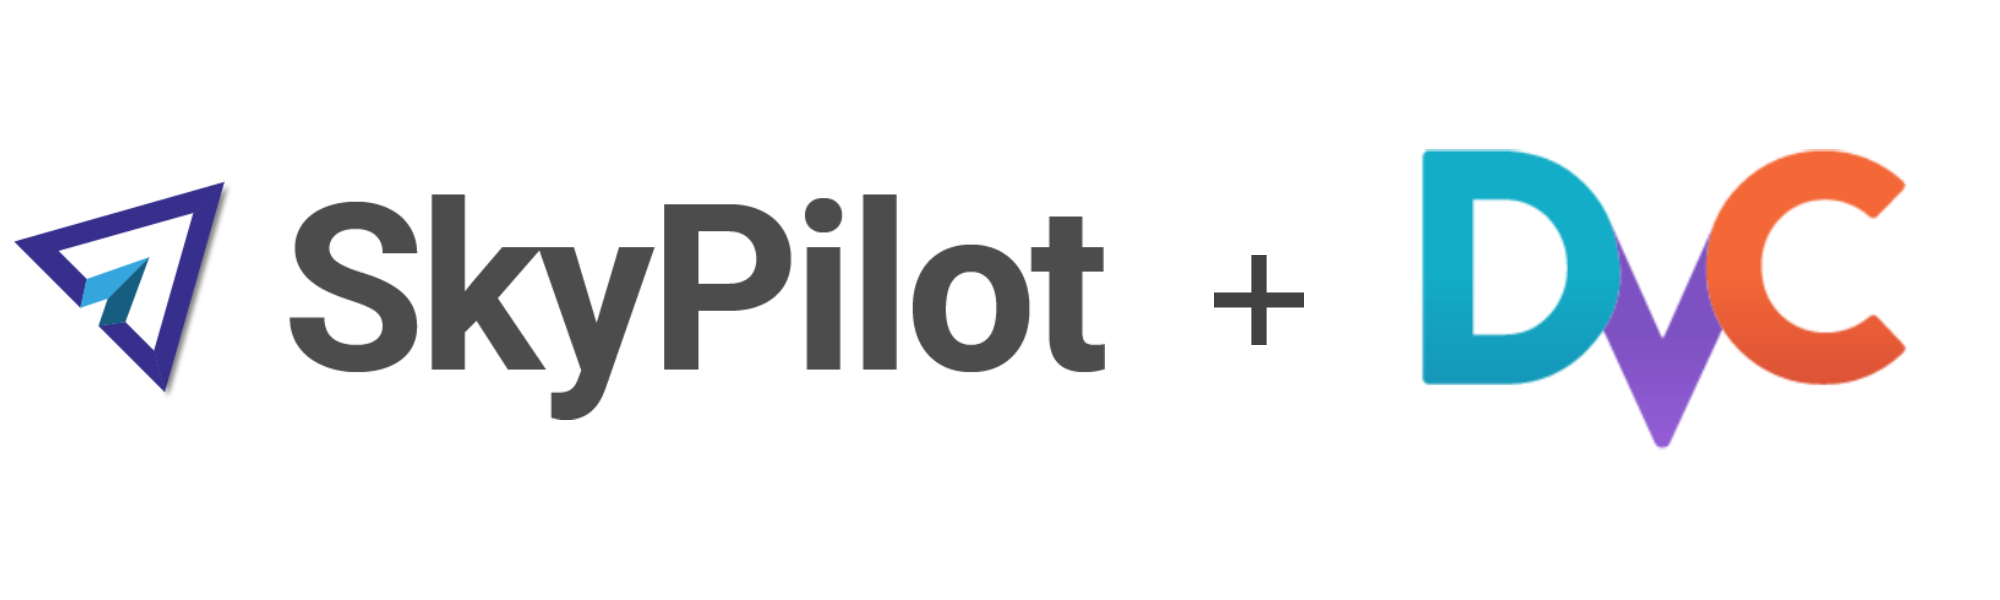 ML experiments in the cloud with Skypilot and DVC